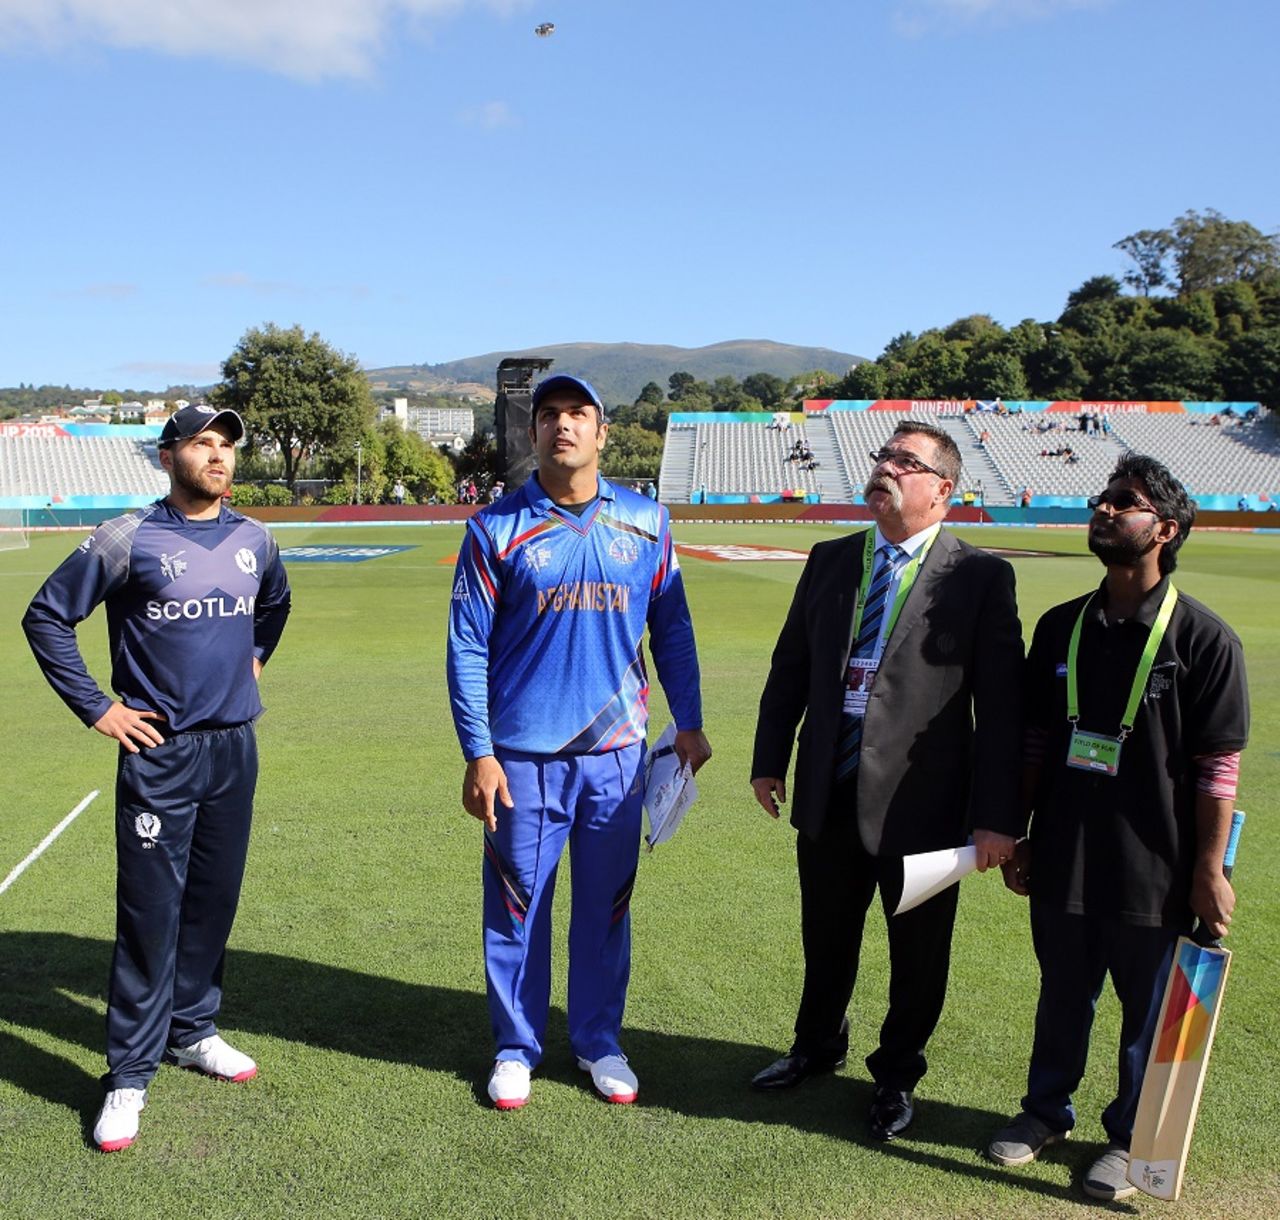 Mohammad Nabi won the toss and put Scotland in, Afghanistan v Scotland, World Cup 2015, Group A, Dunedin, February 26, 2015